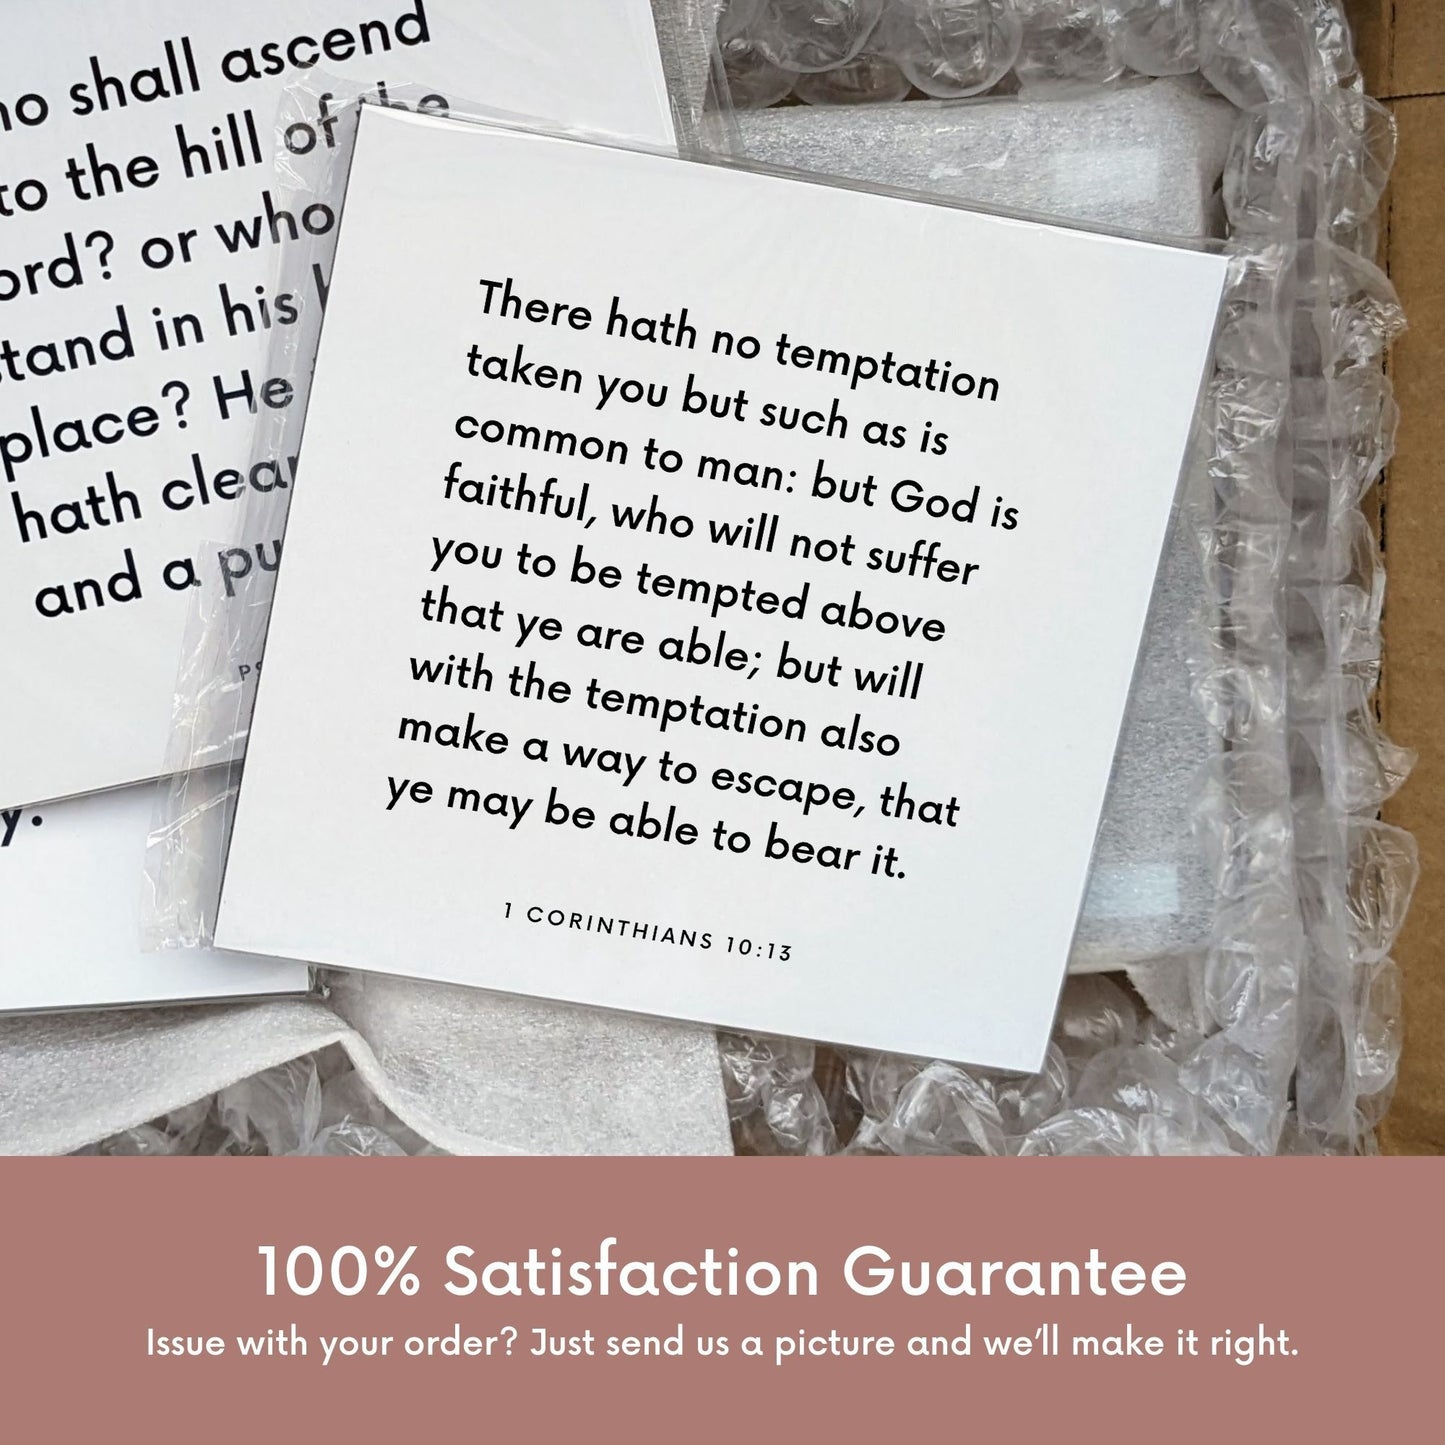 Shipping materials for scripture tile of 1 Corinthians 10:13 - "God will not suffer you to be tempted above that ye are able"